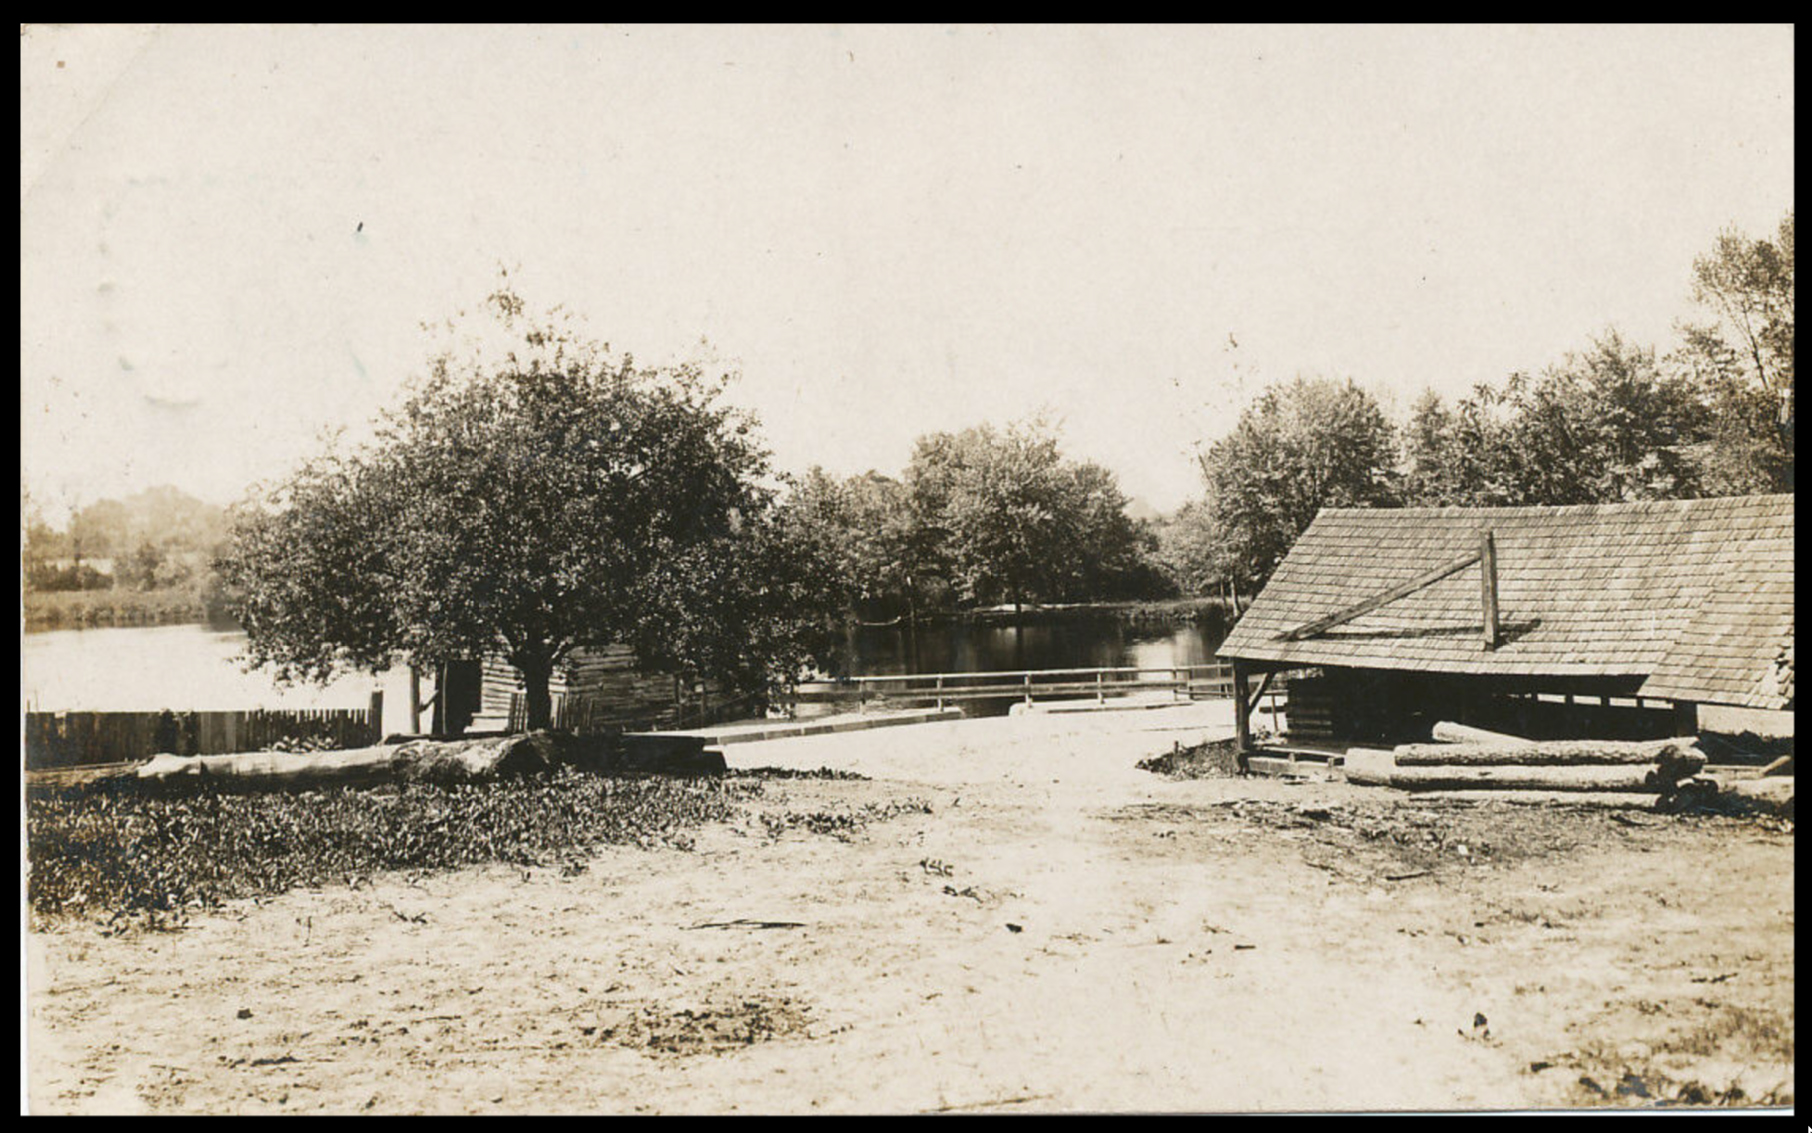 Vincentown - Looks like a sawmill and more - c 1910